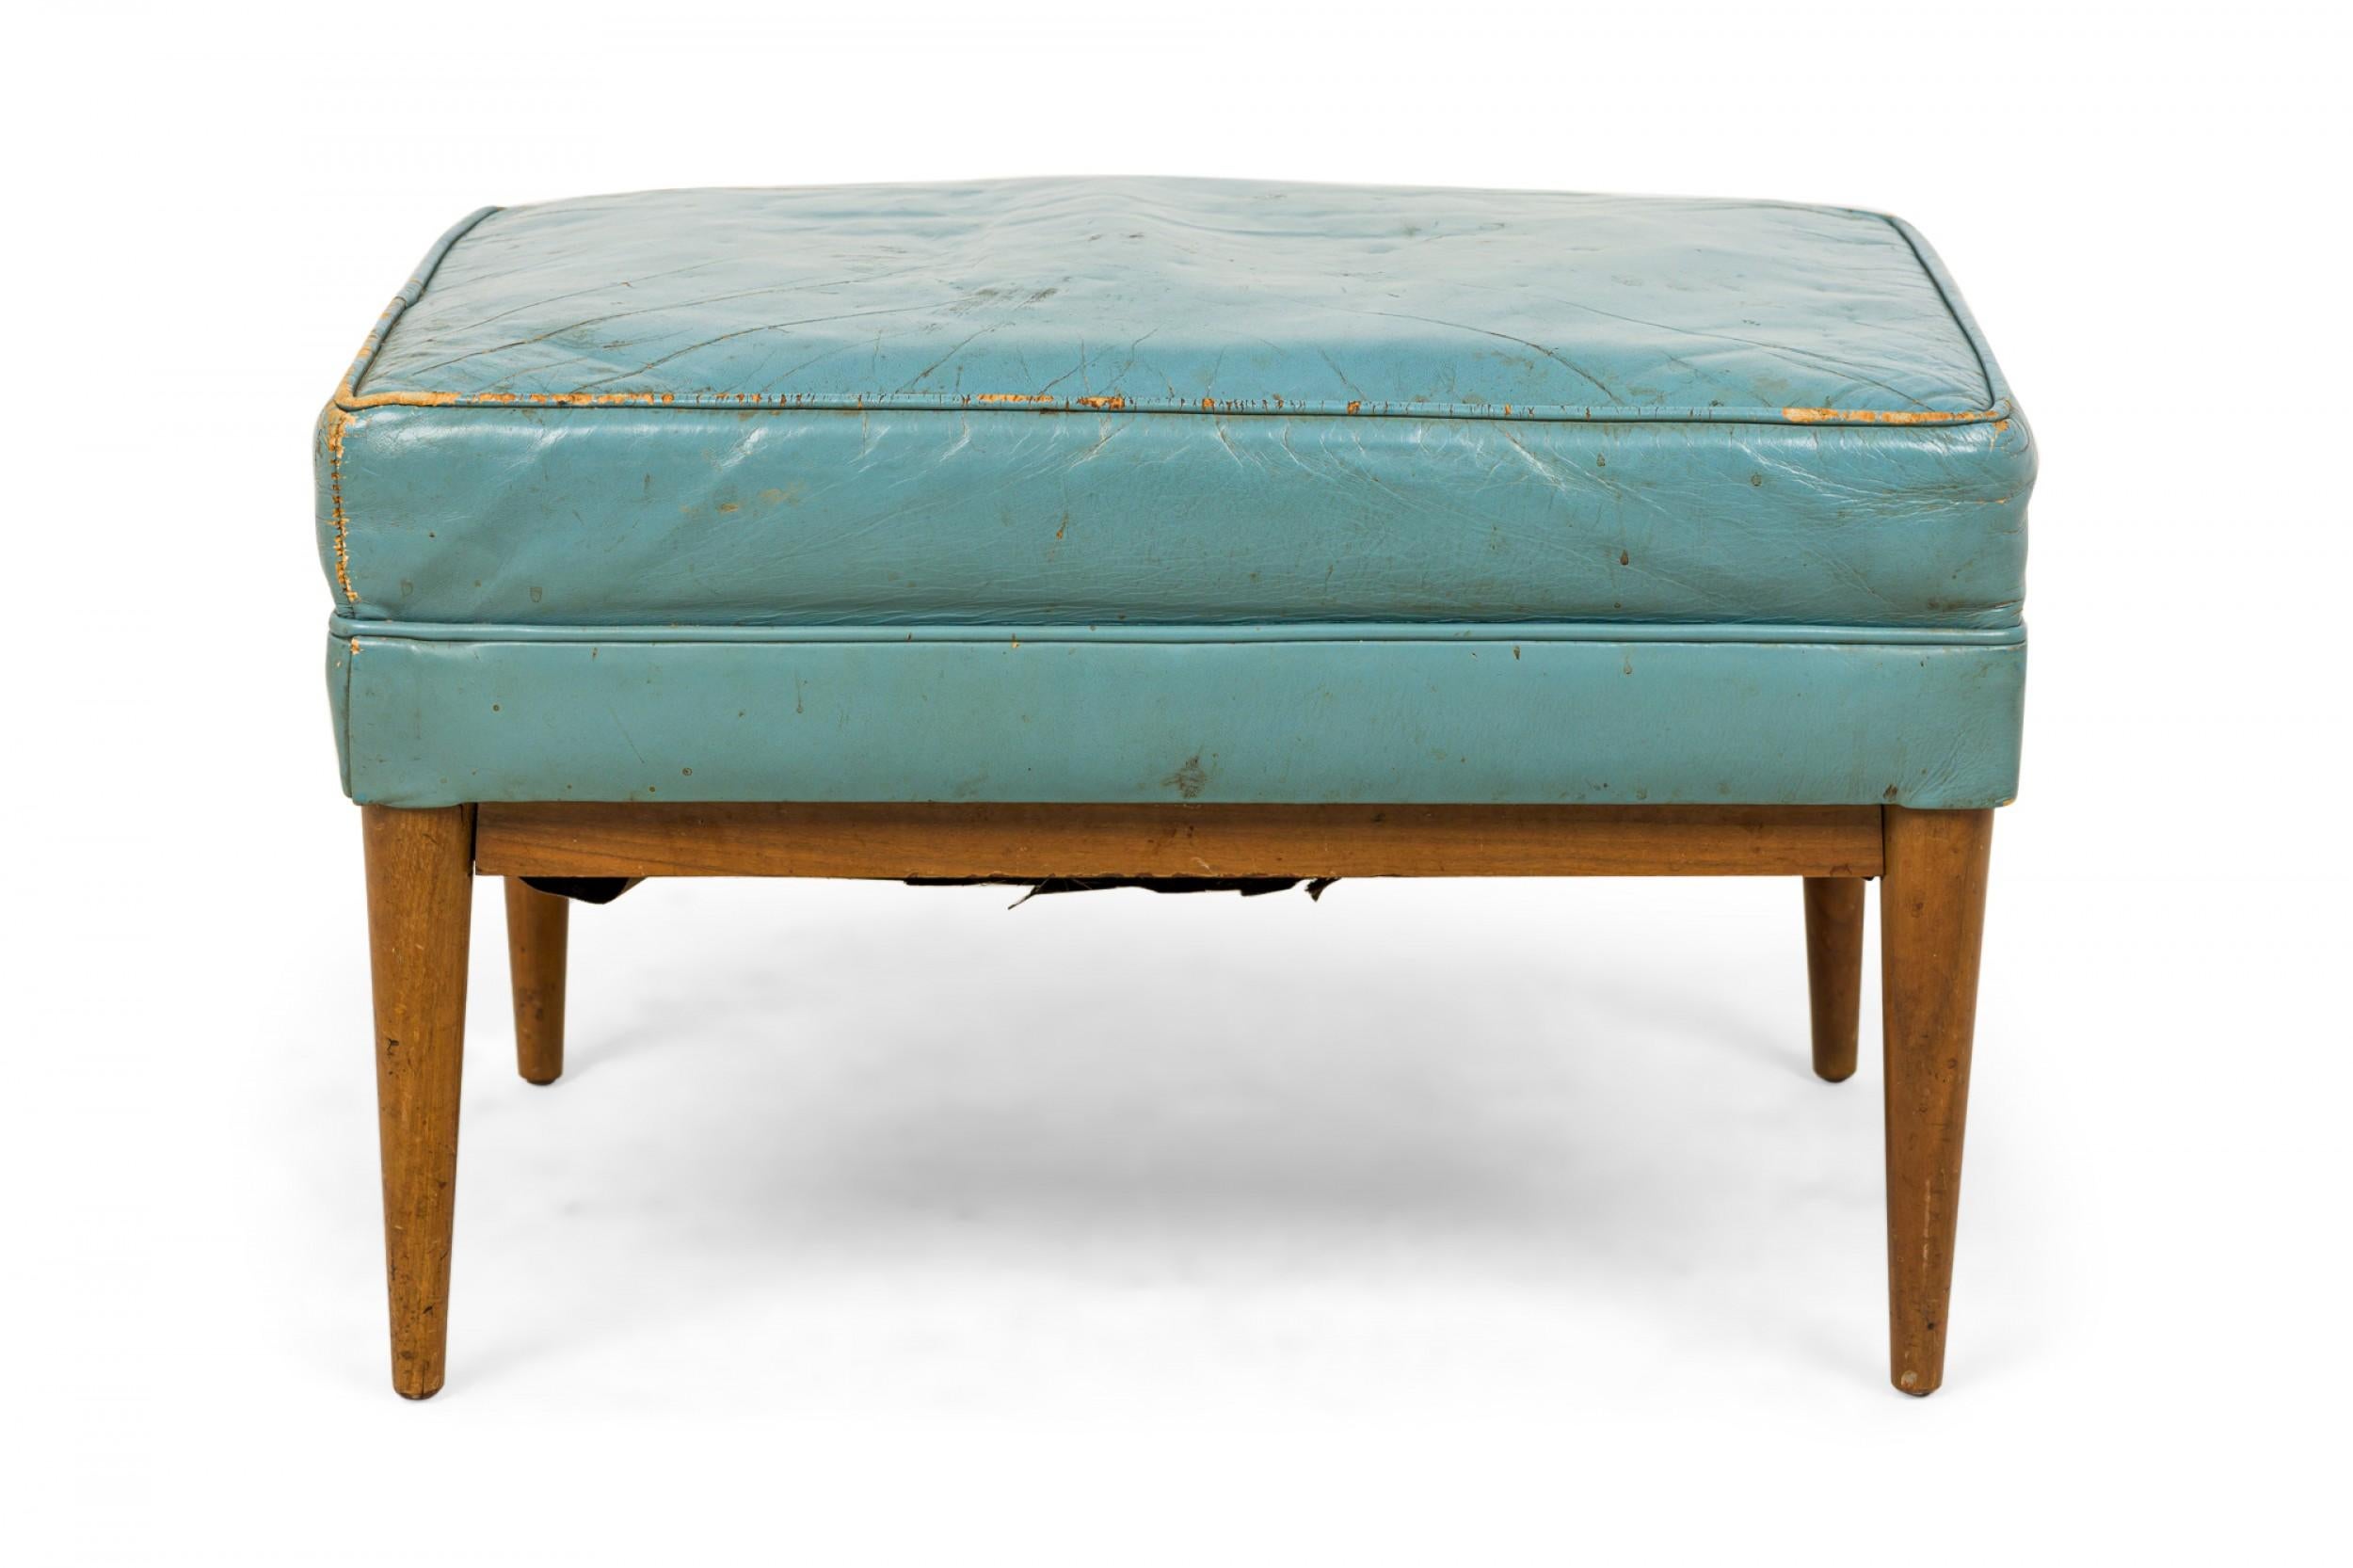 American Mid-Century rectangular ottoman with a blue leather upholstered seat resting on a walnut frame with tapered legs. (Paul Mccobb for Directional).
     